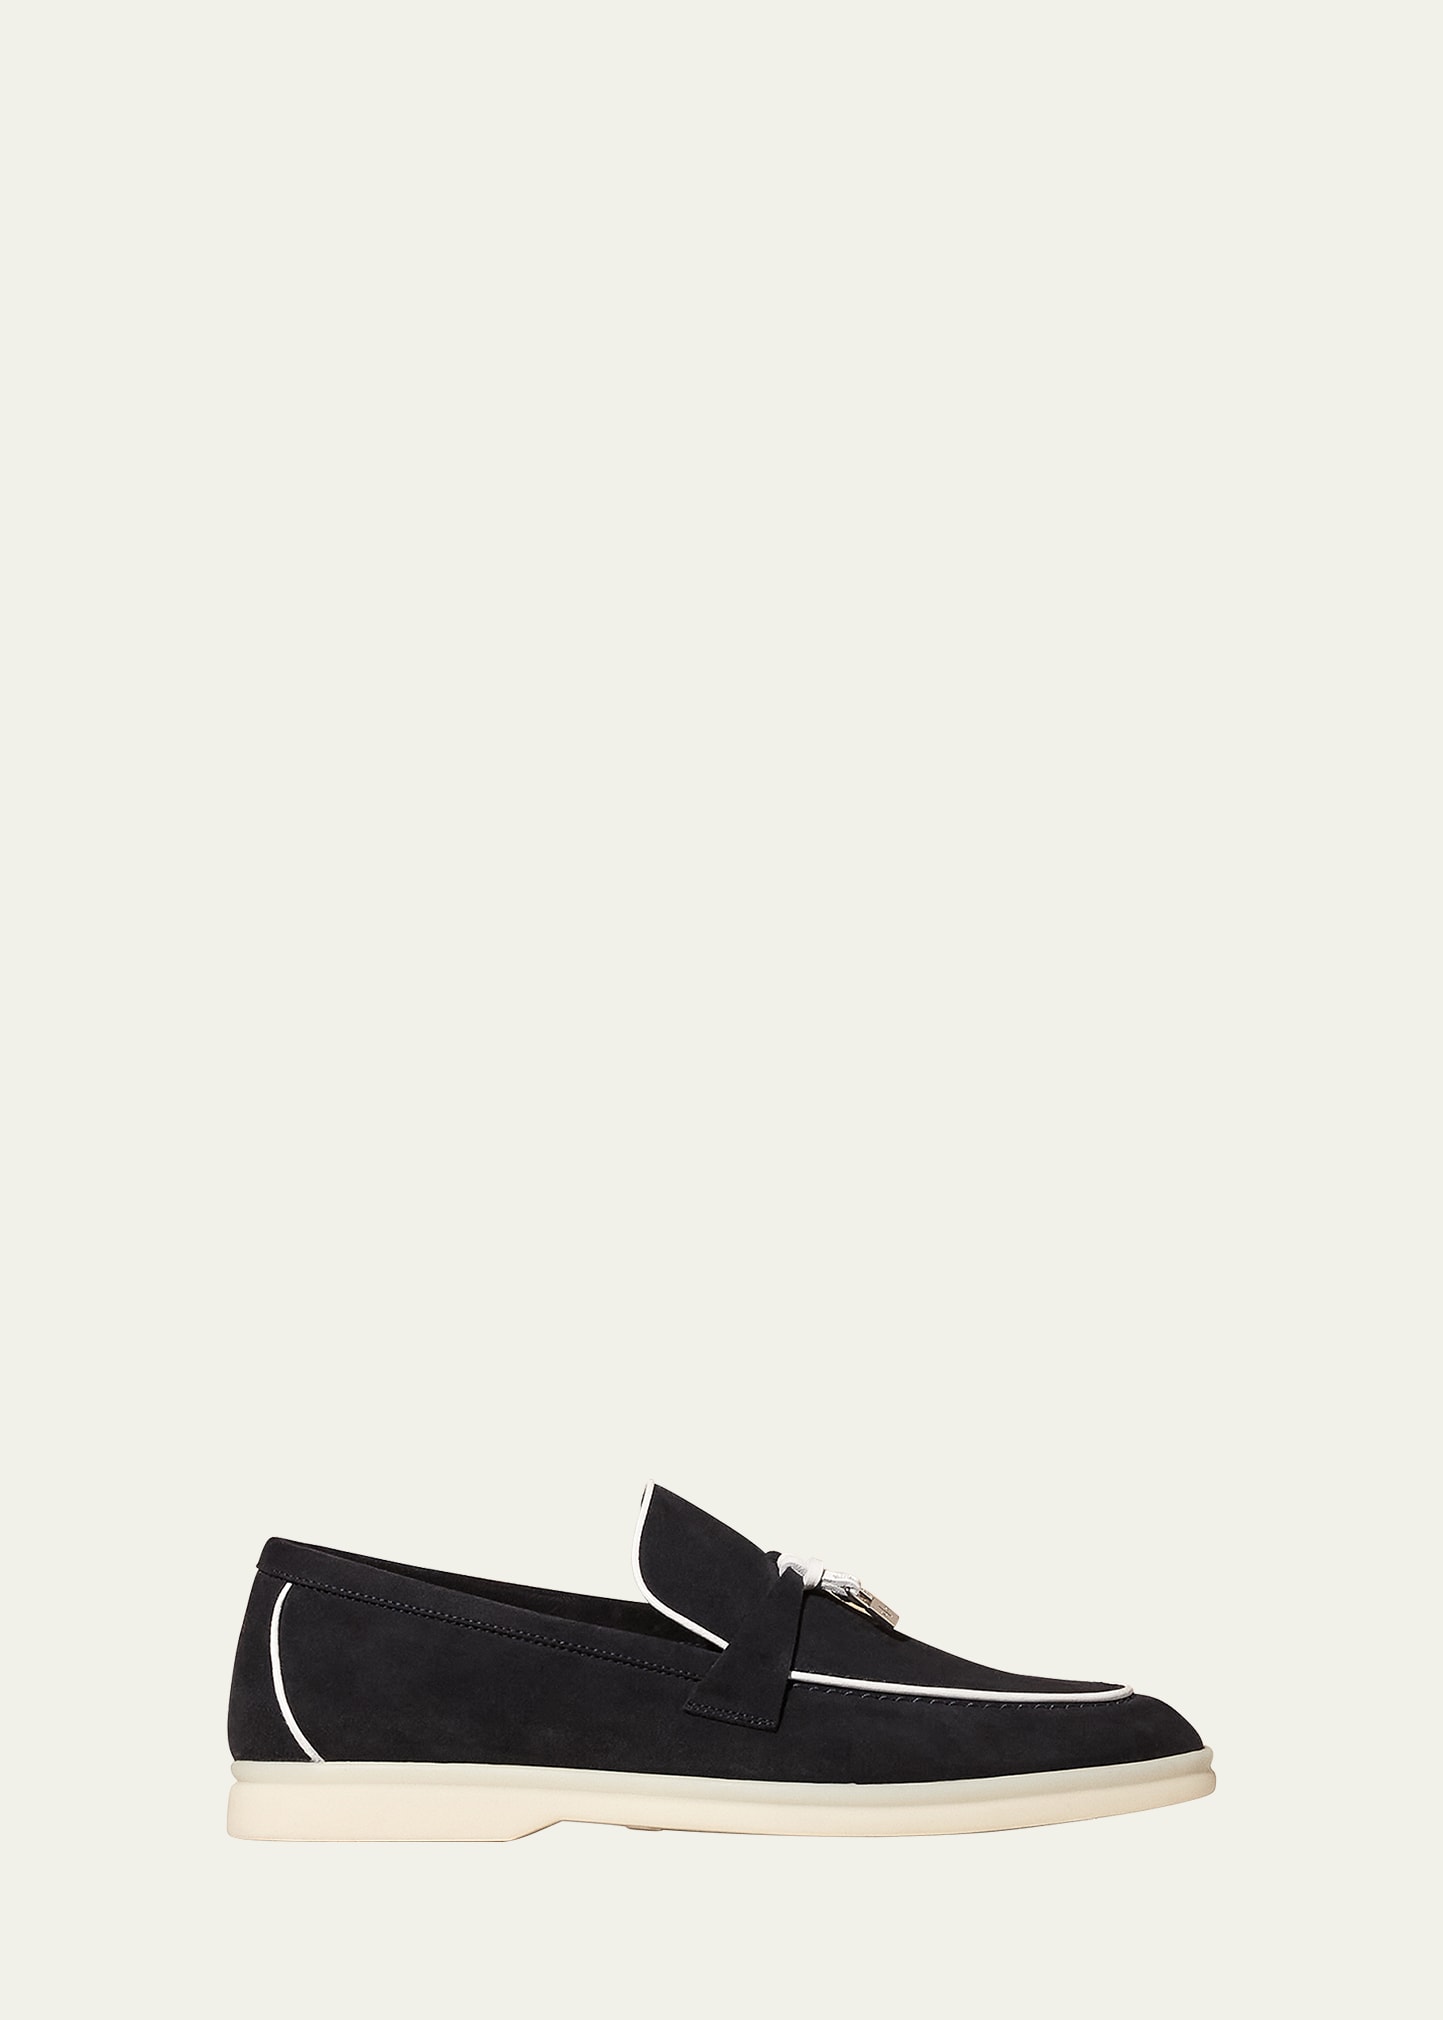 Loro Piana Summer Suede Charms Loafers